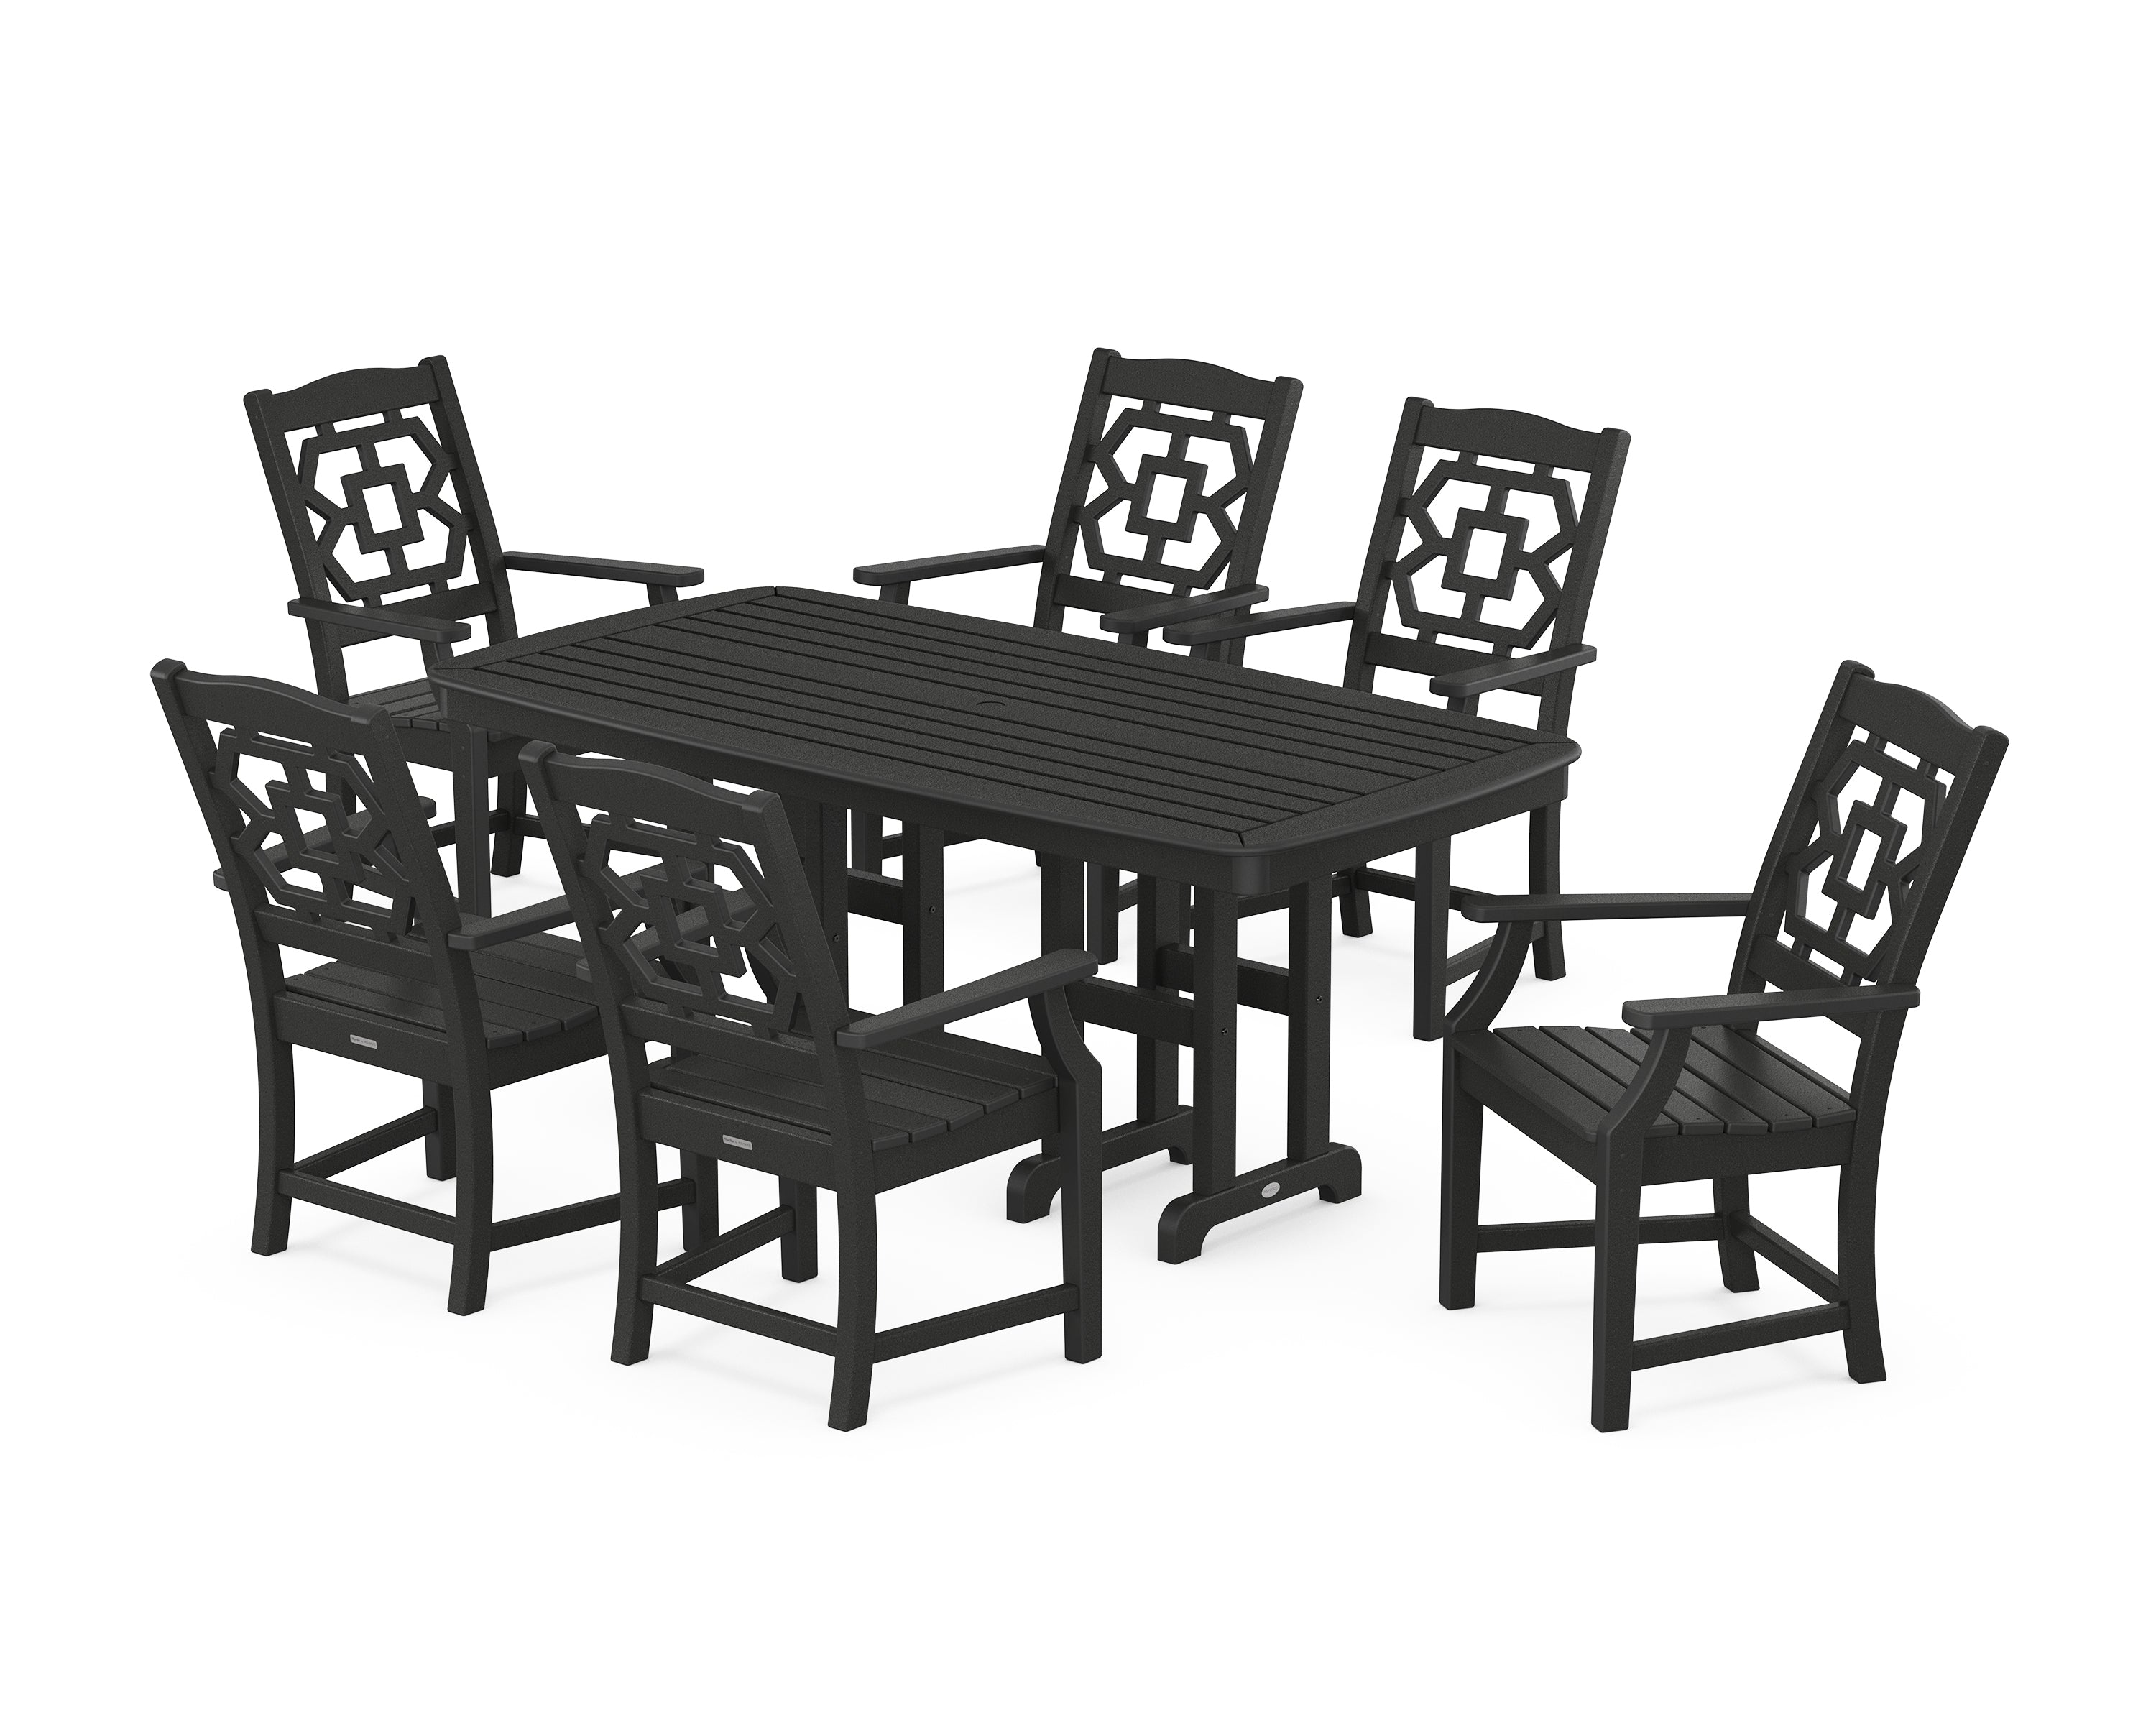 Martha Stewart by POLYWOOD® Chinoiserie Arm Chair 7-Piece Dining Set in Black